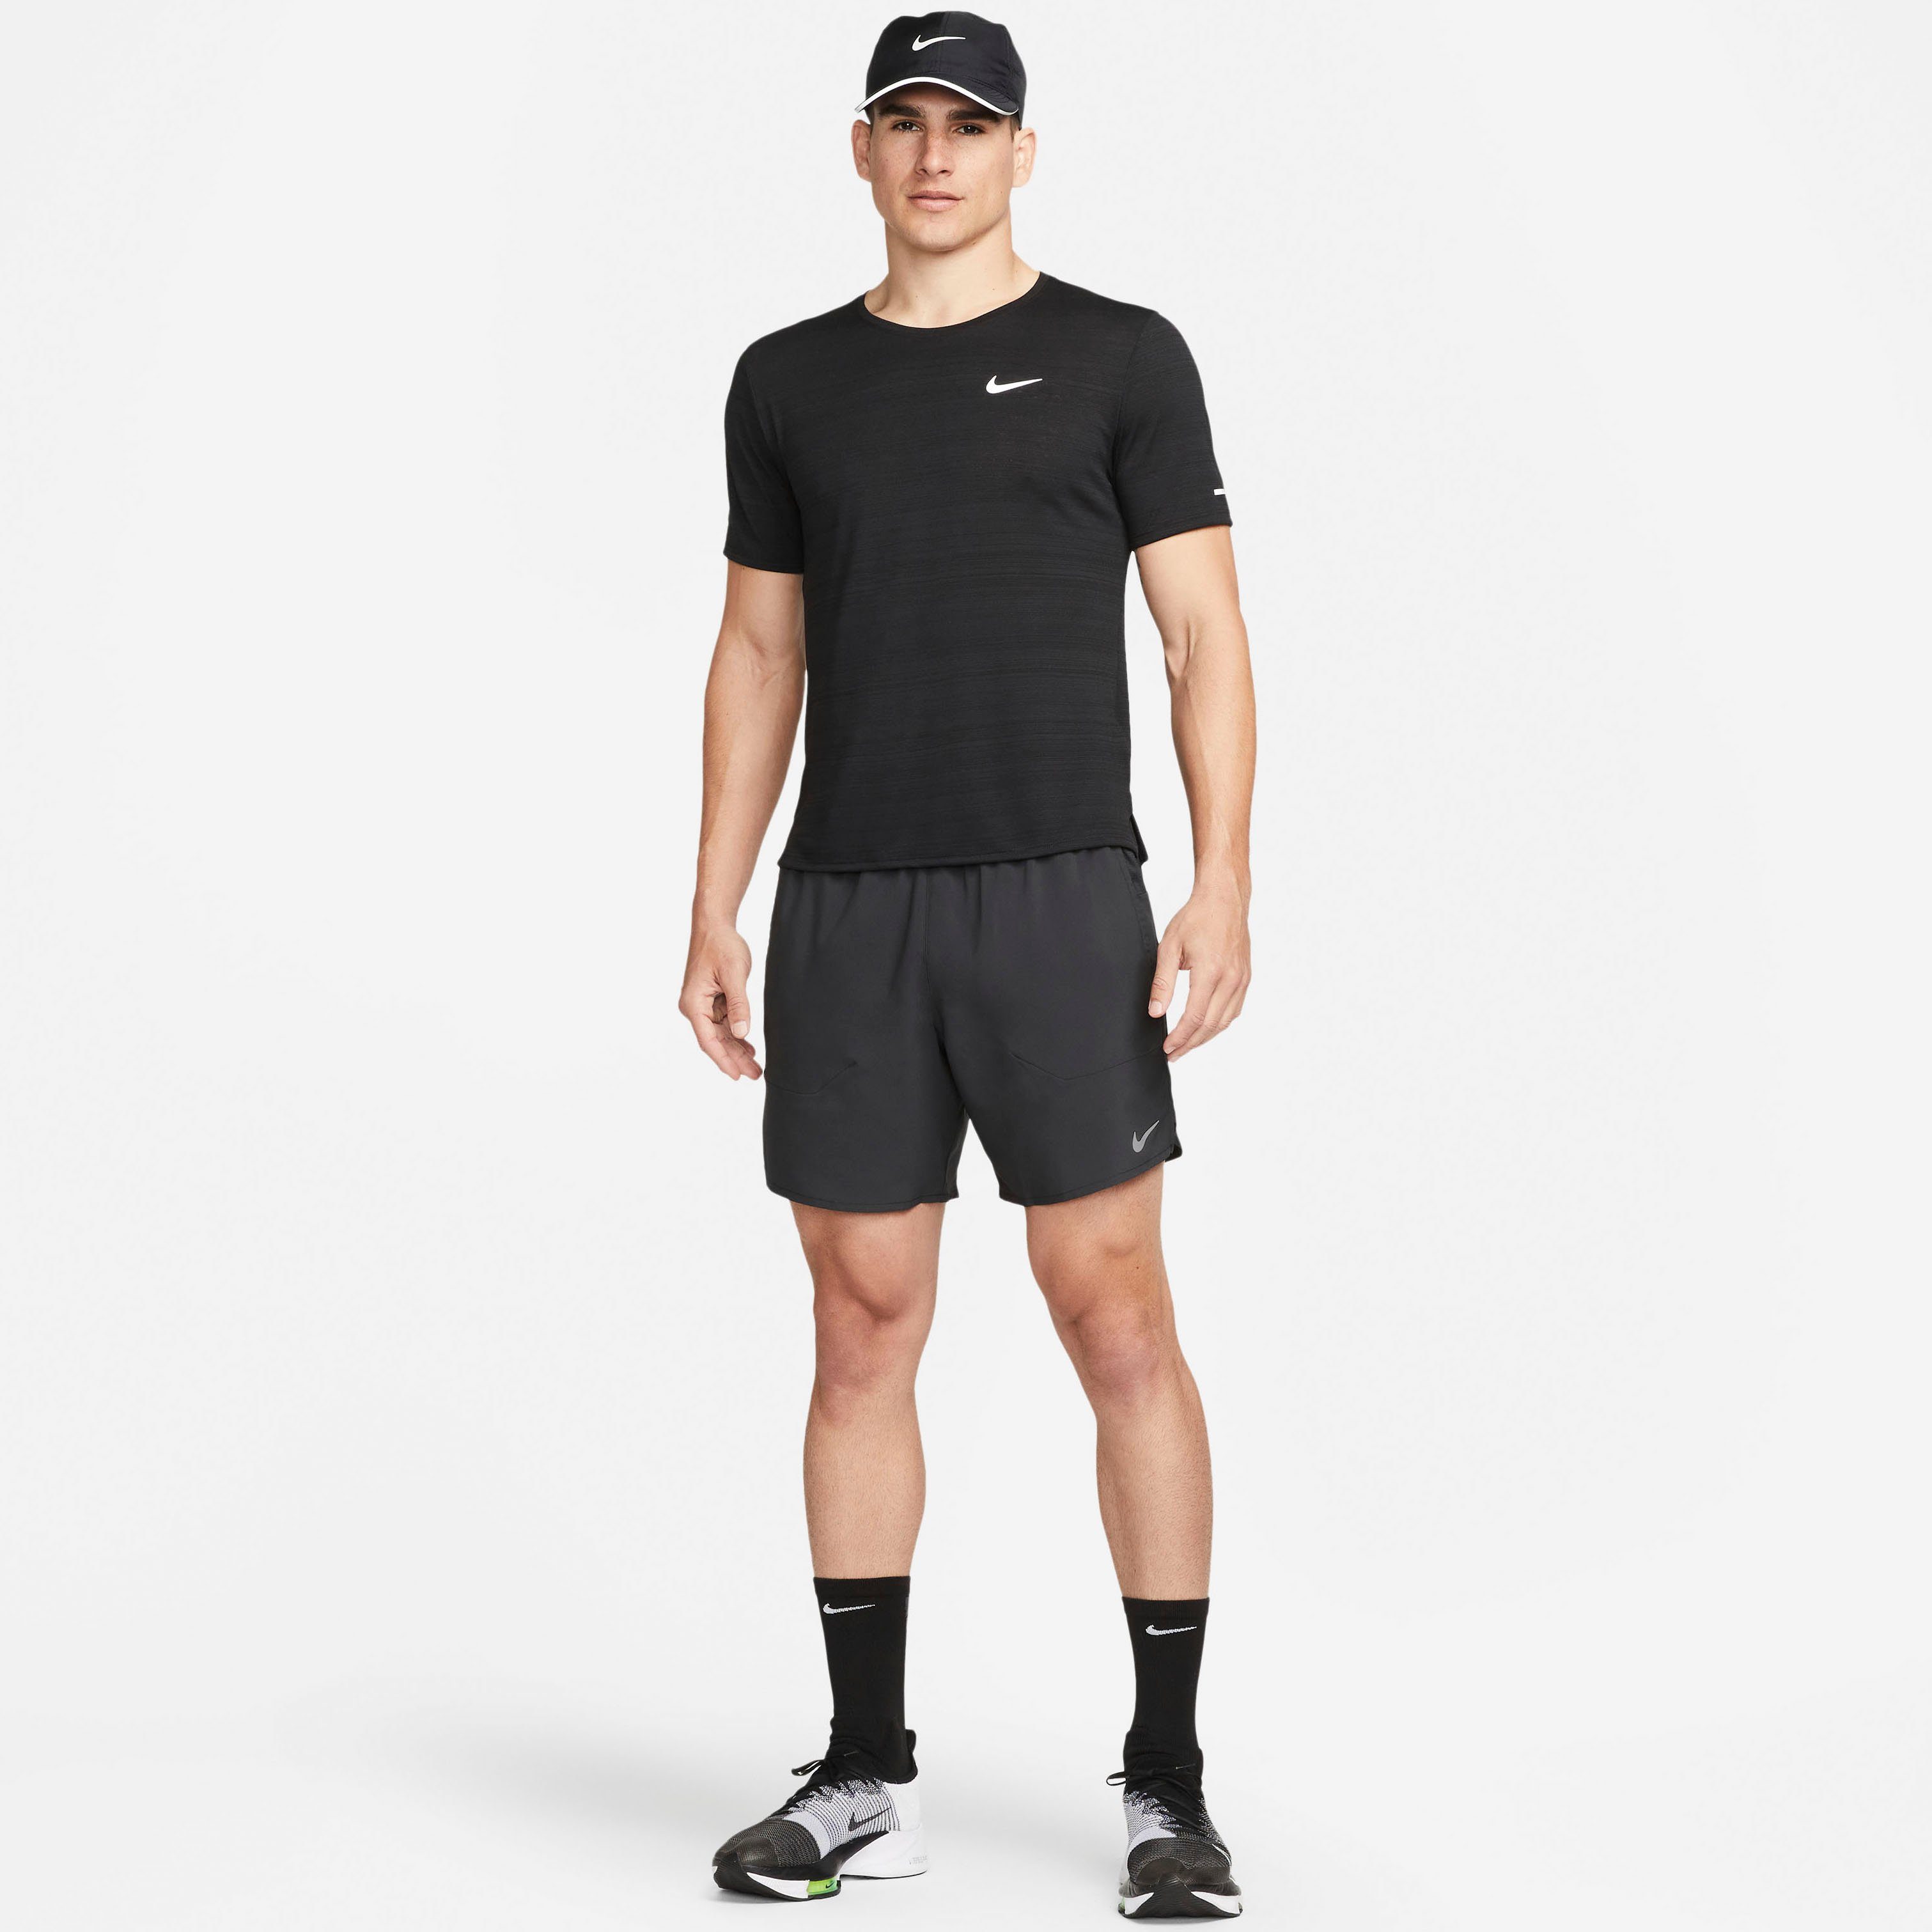 Brief-Lined Nike " Shorts Dri-FIT Men's Laufshorts Stride Running